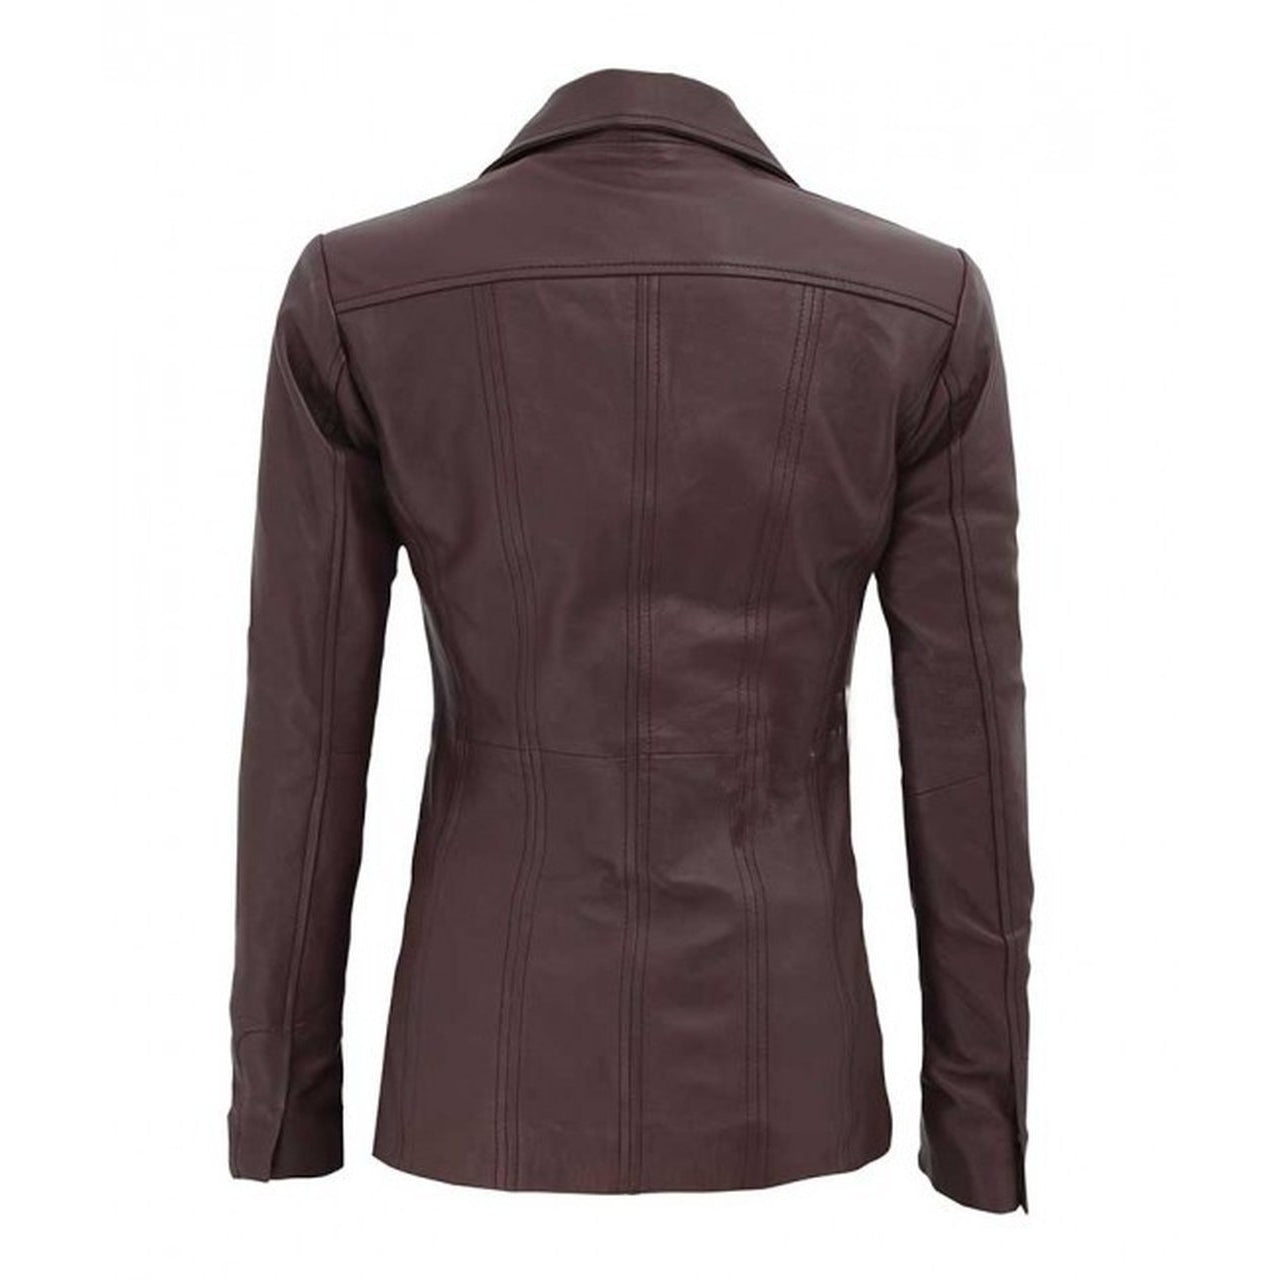 Brown Three Button Closure Leather Blazer for Women - Leather Jacket